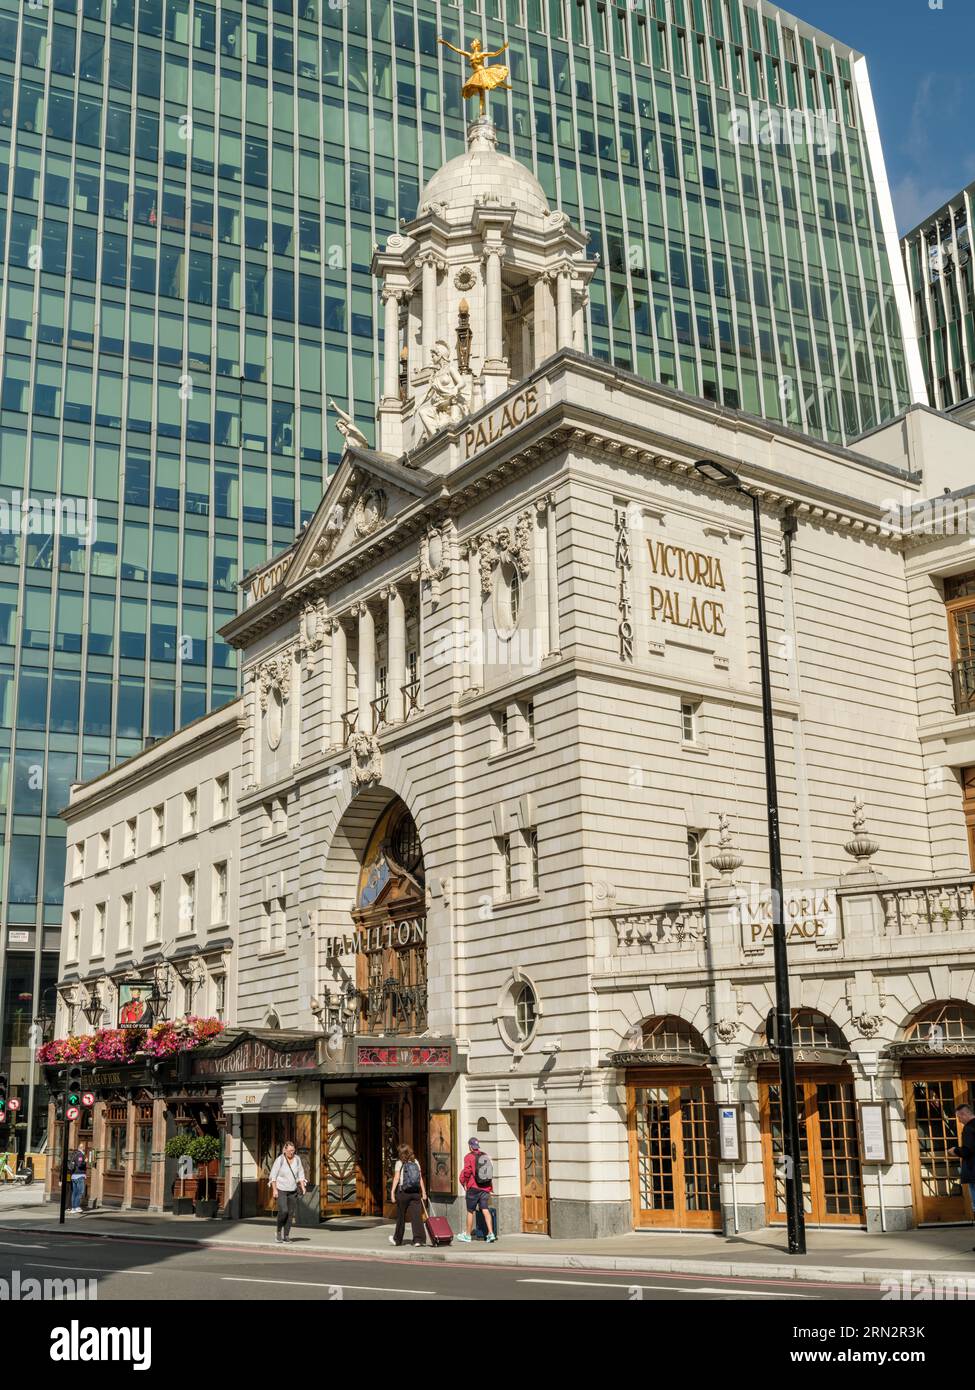 The Victoria Palace, Victoria Street, London - England. The Victoria Palace Theatre is a West End theatre opposite Victoria Station in the City of Wes Stock Photo